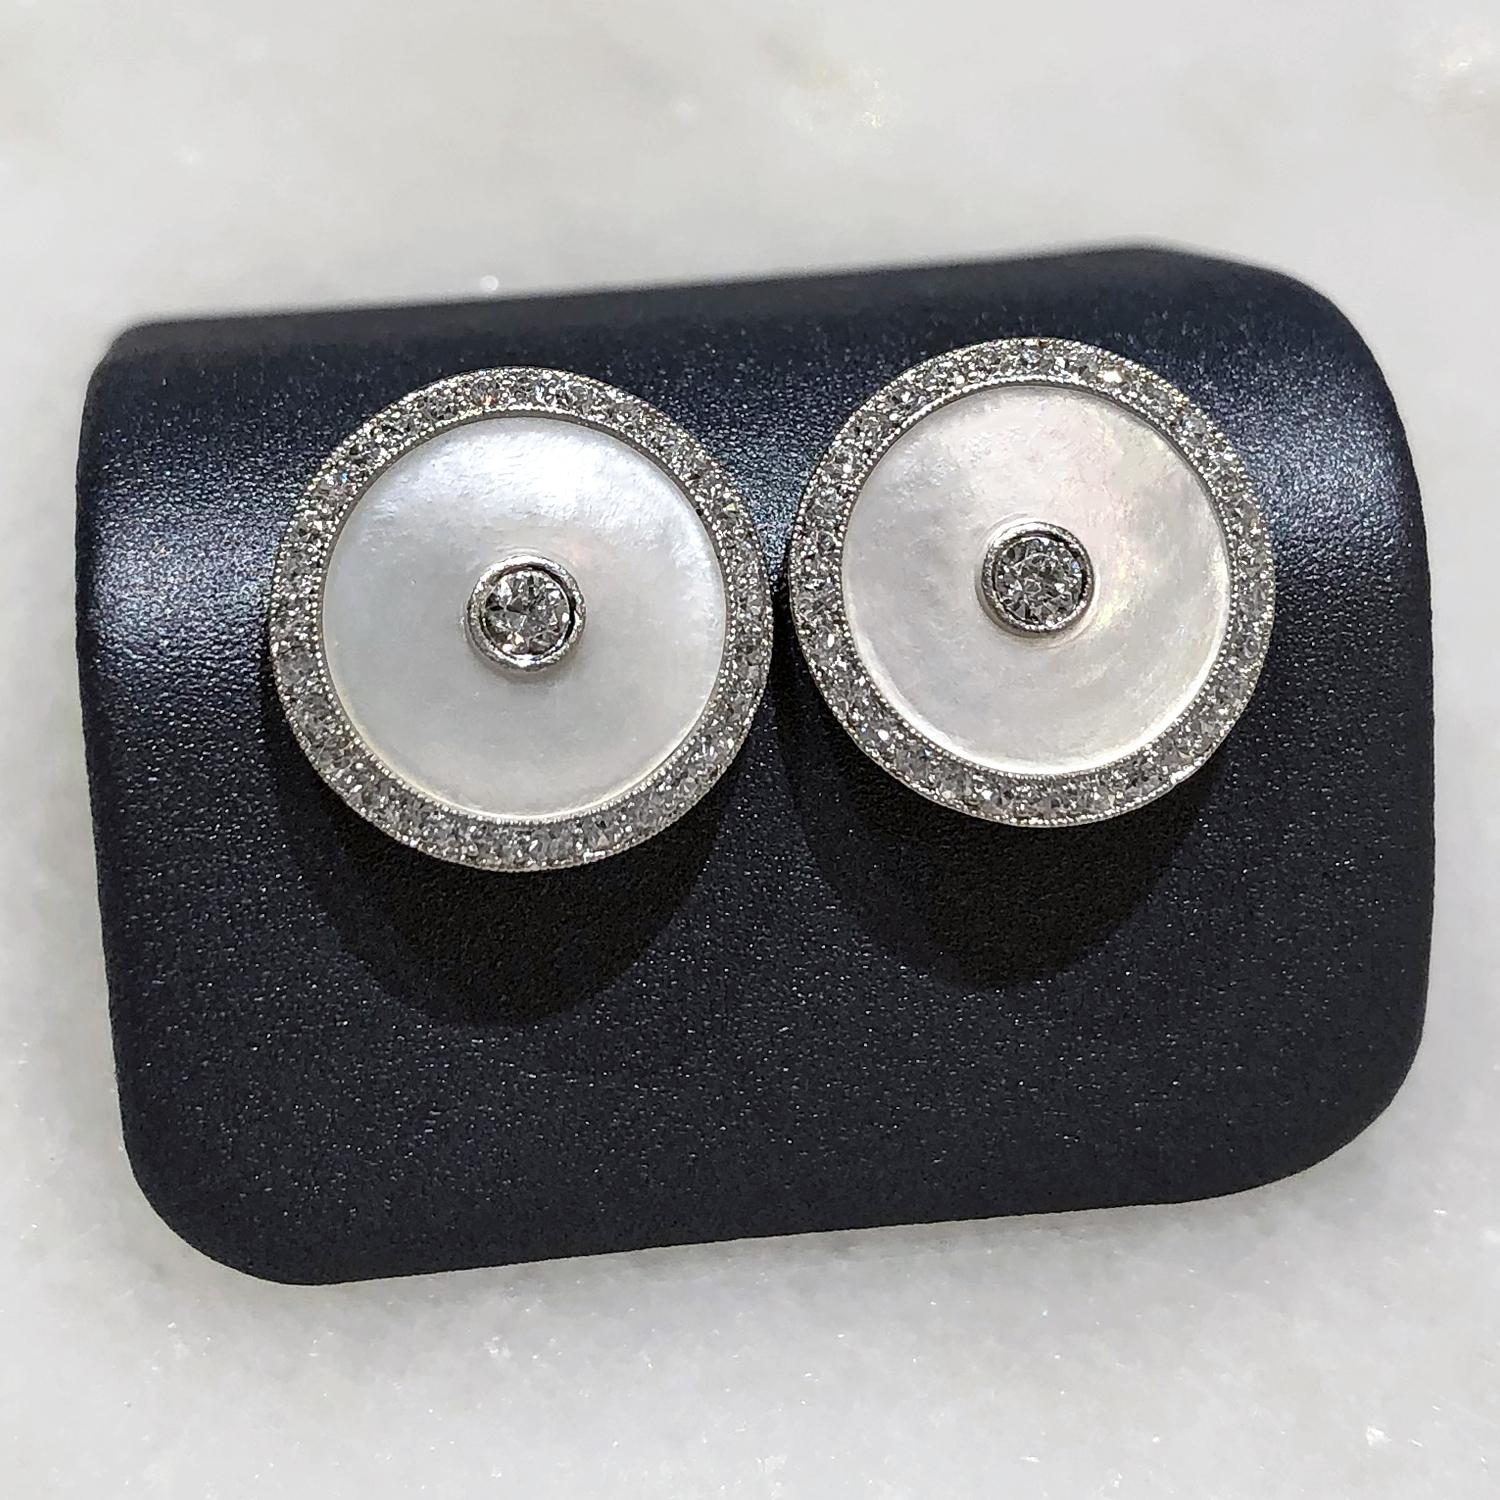 One of a Kind Stud Earrings handcrafted by  jewelry artist Julie Romanenko featuring a pair of 14k white gold, mother-of-pearl, and round brilliant-cut white diamond discs converted from a vintage cufflink into a beautiful pair of stud earrings.